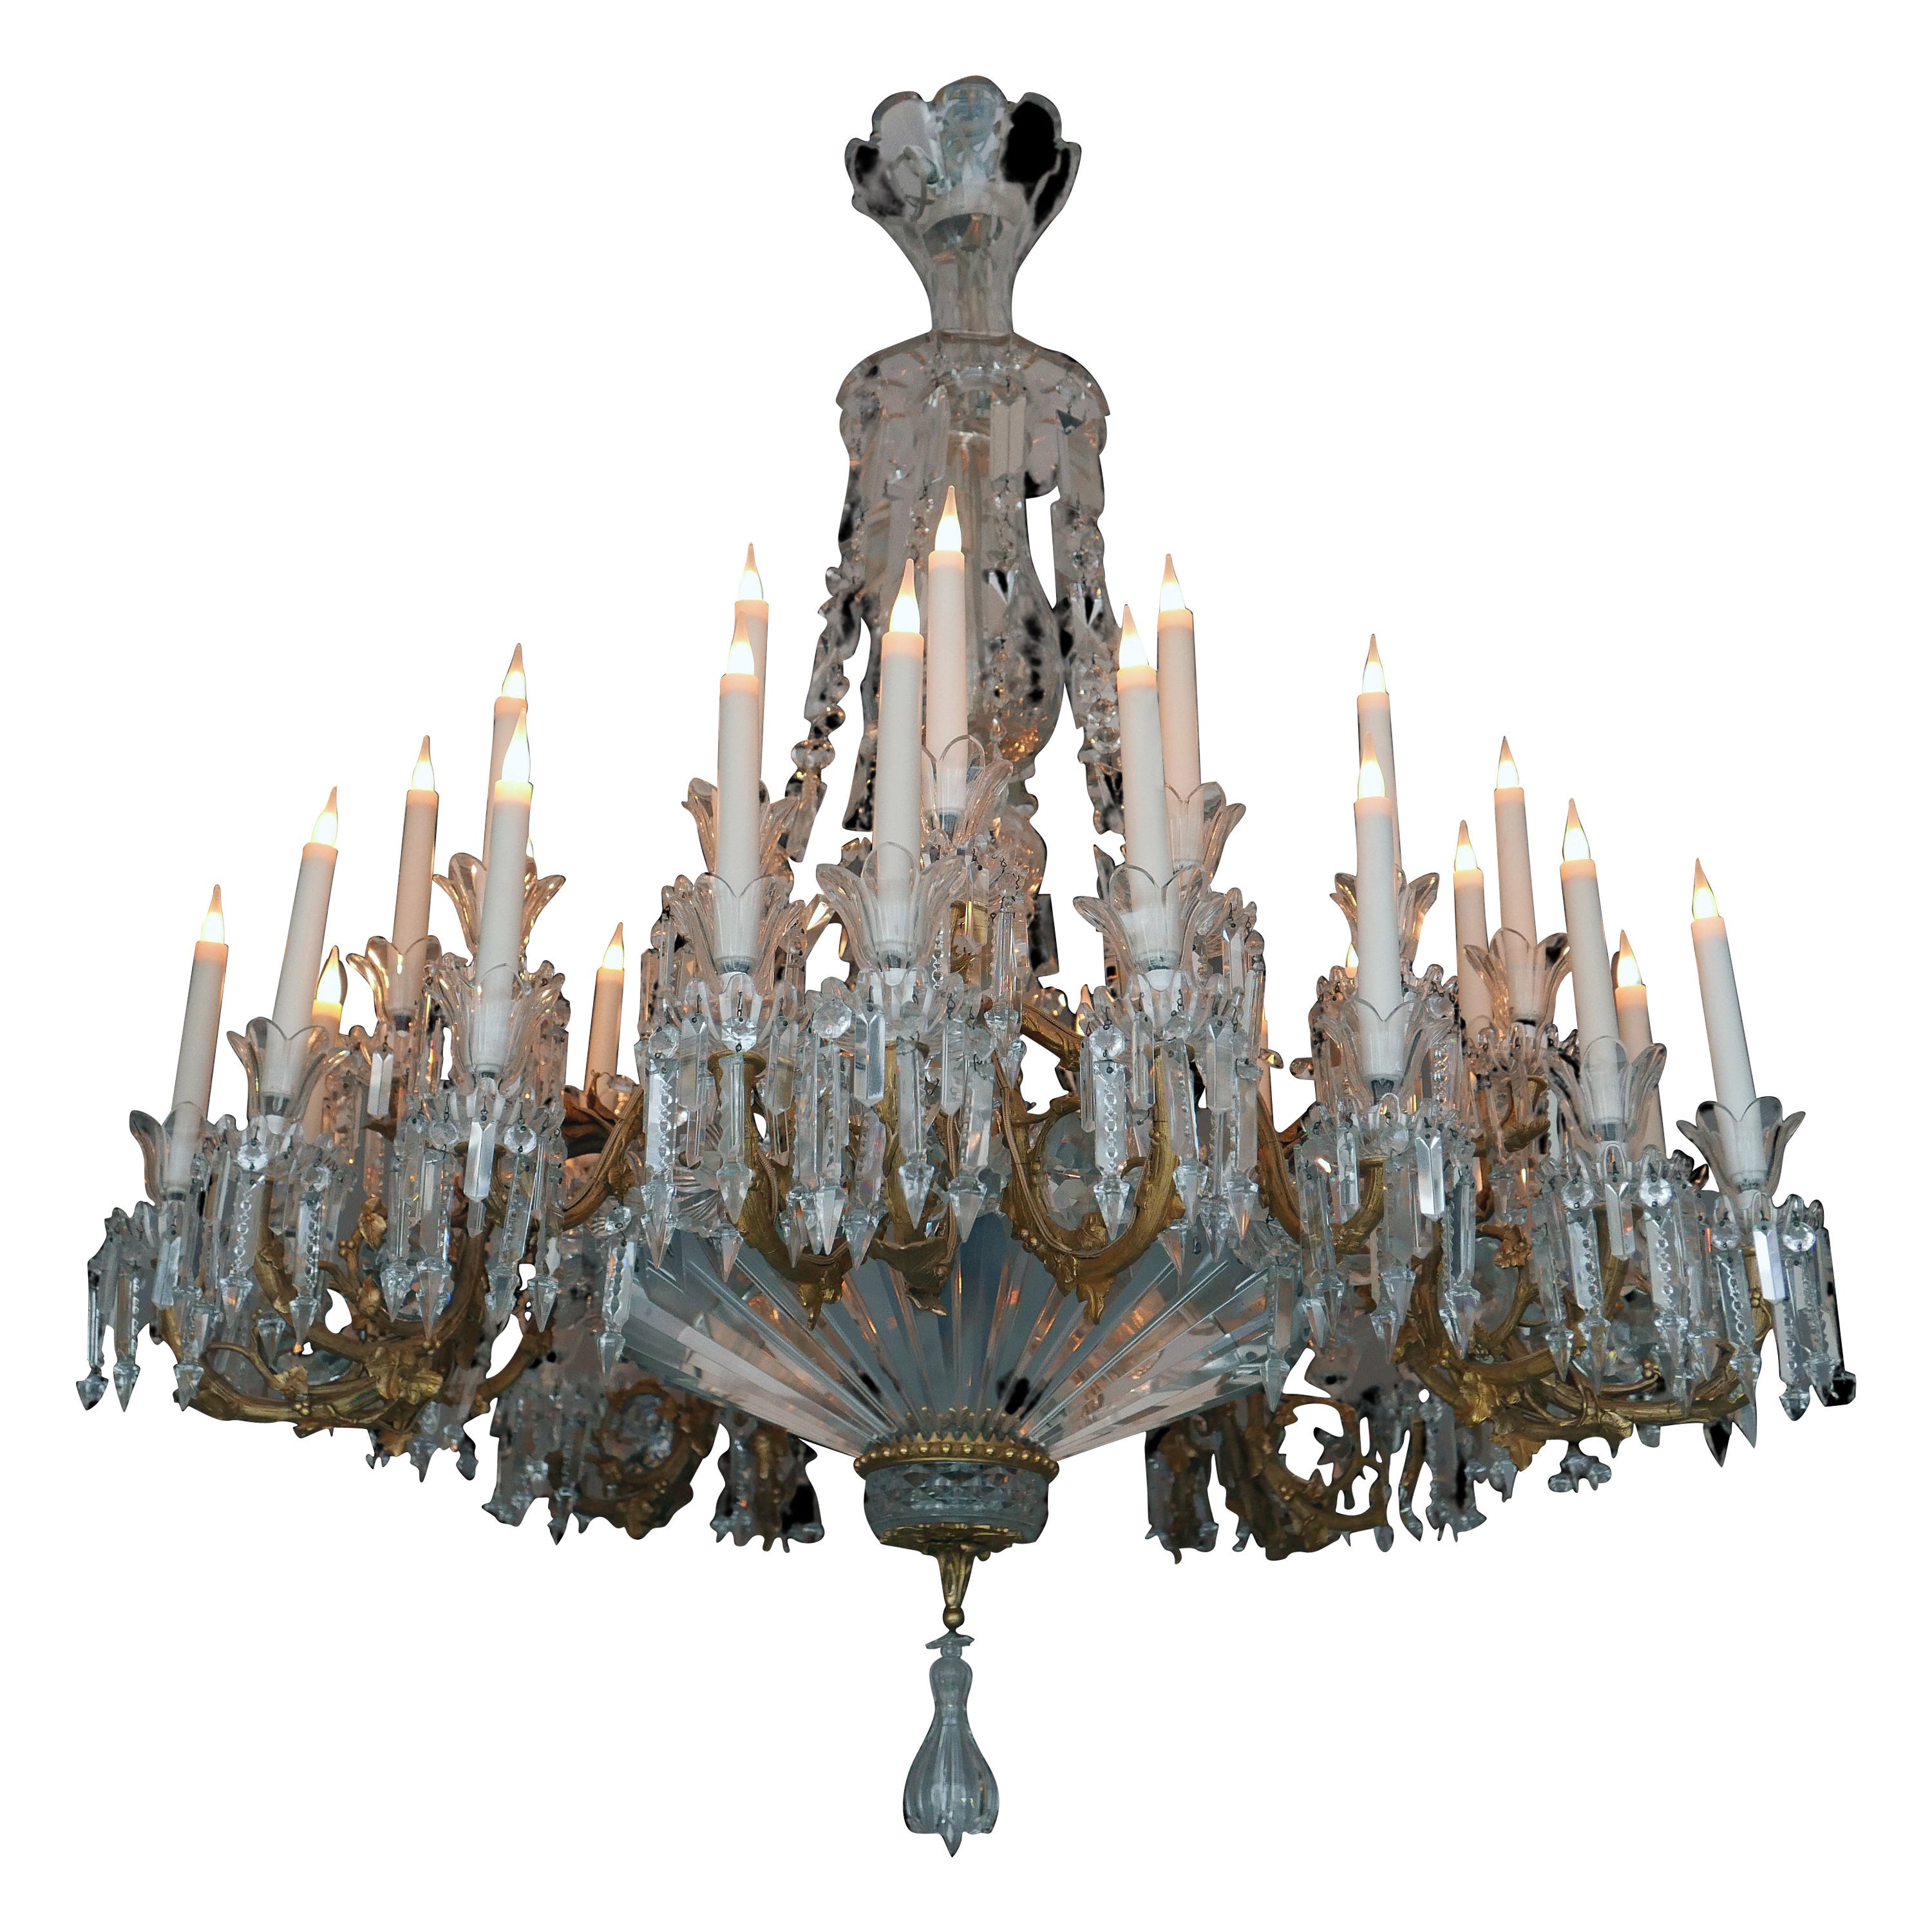 Baccarat Crystal and Gilded Bronze Chandelier, France, circa 1890